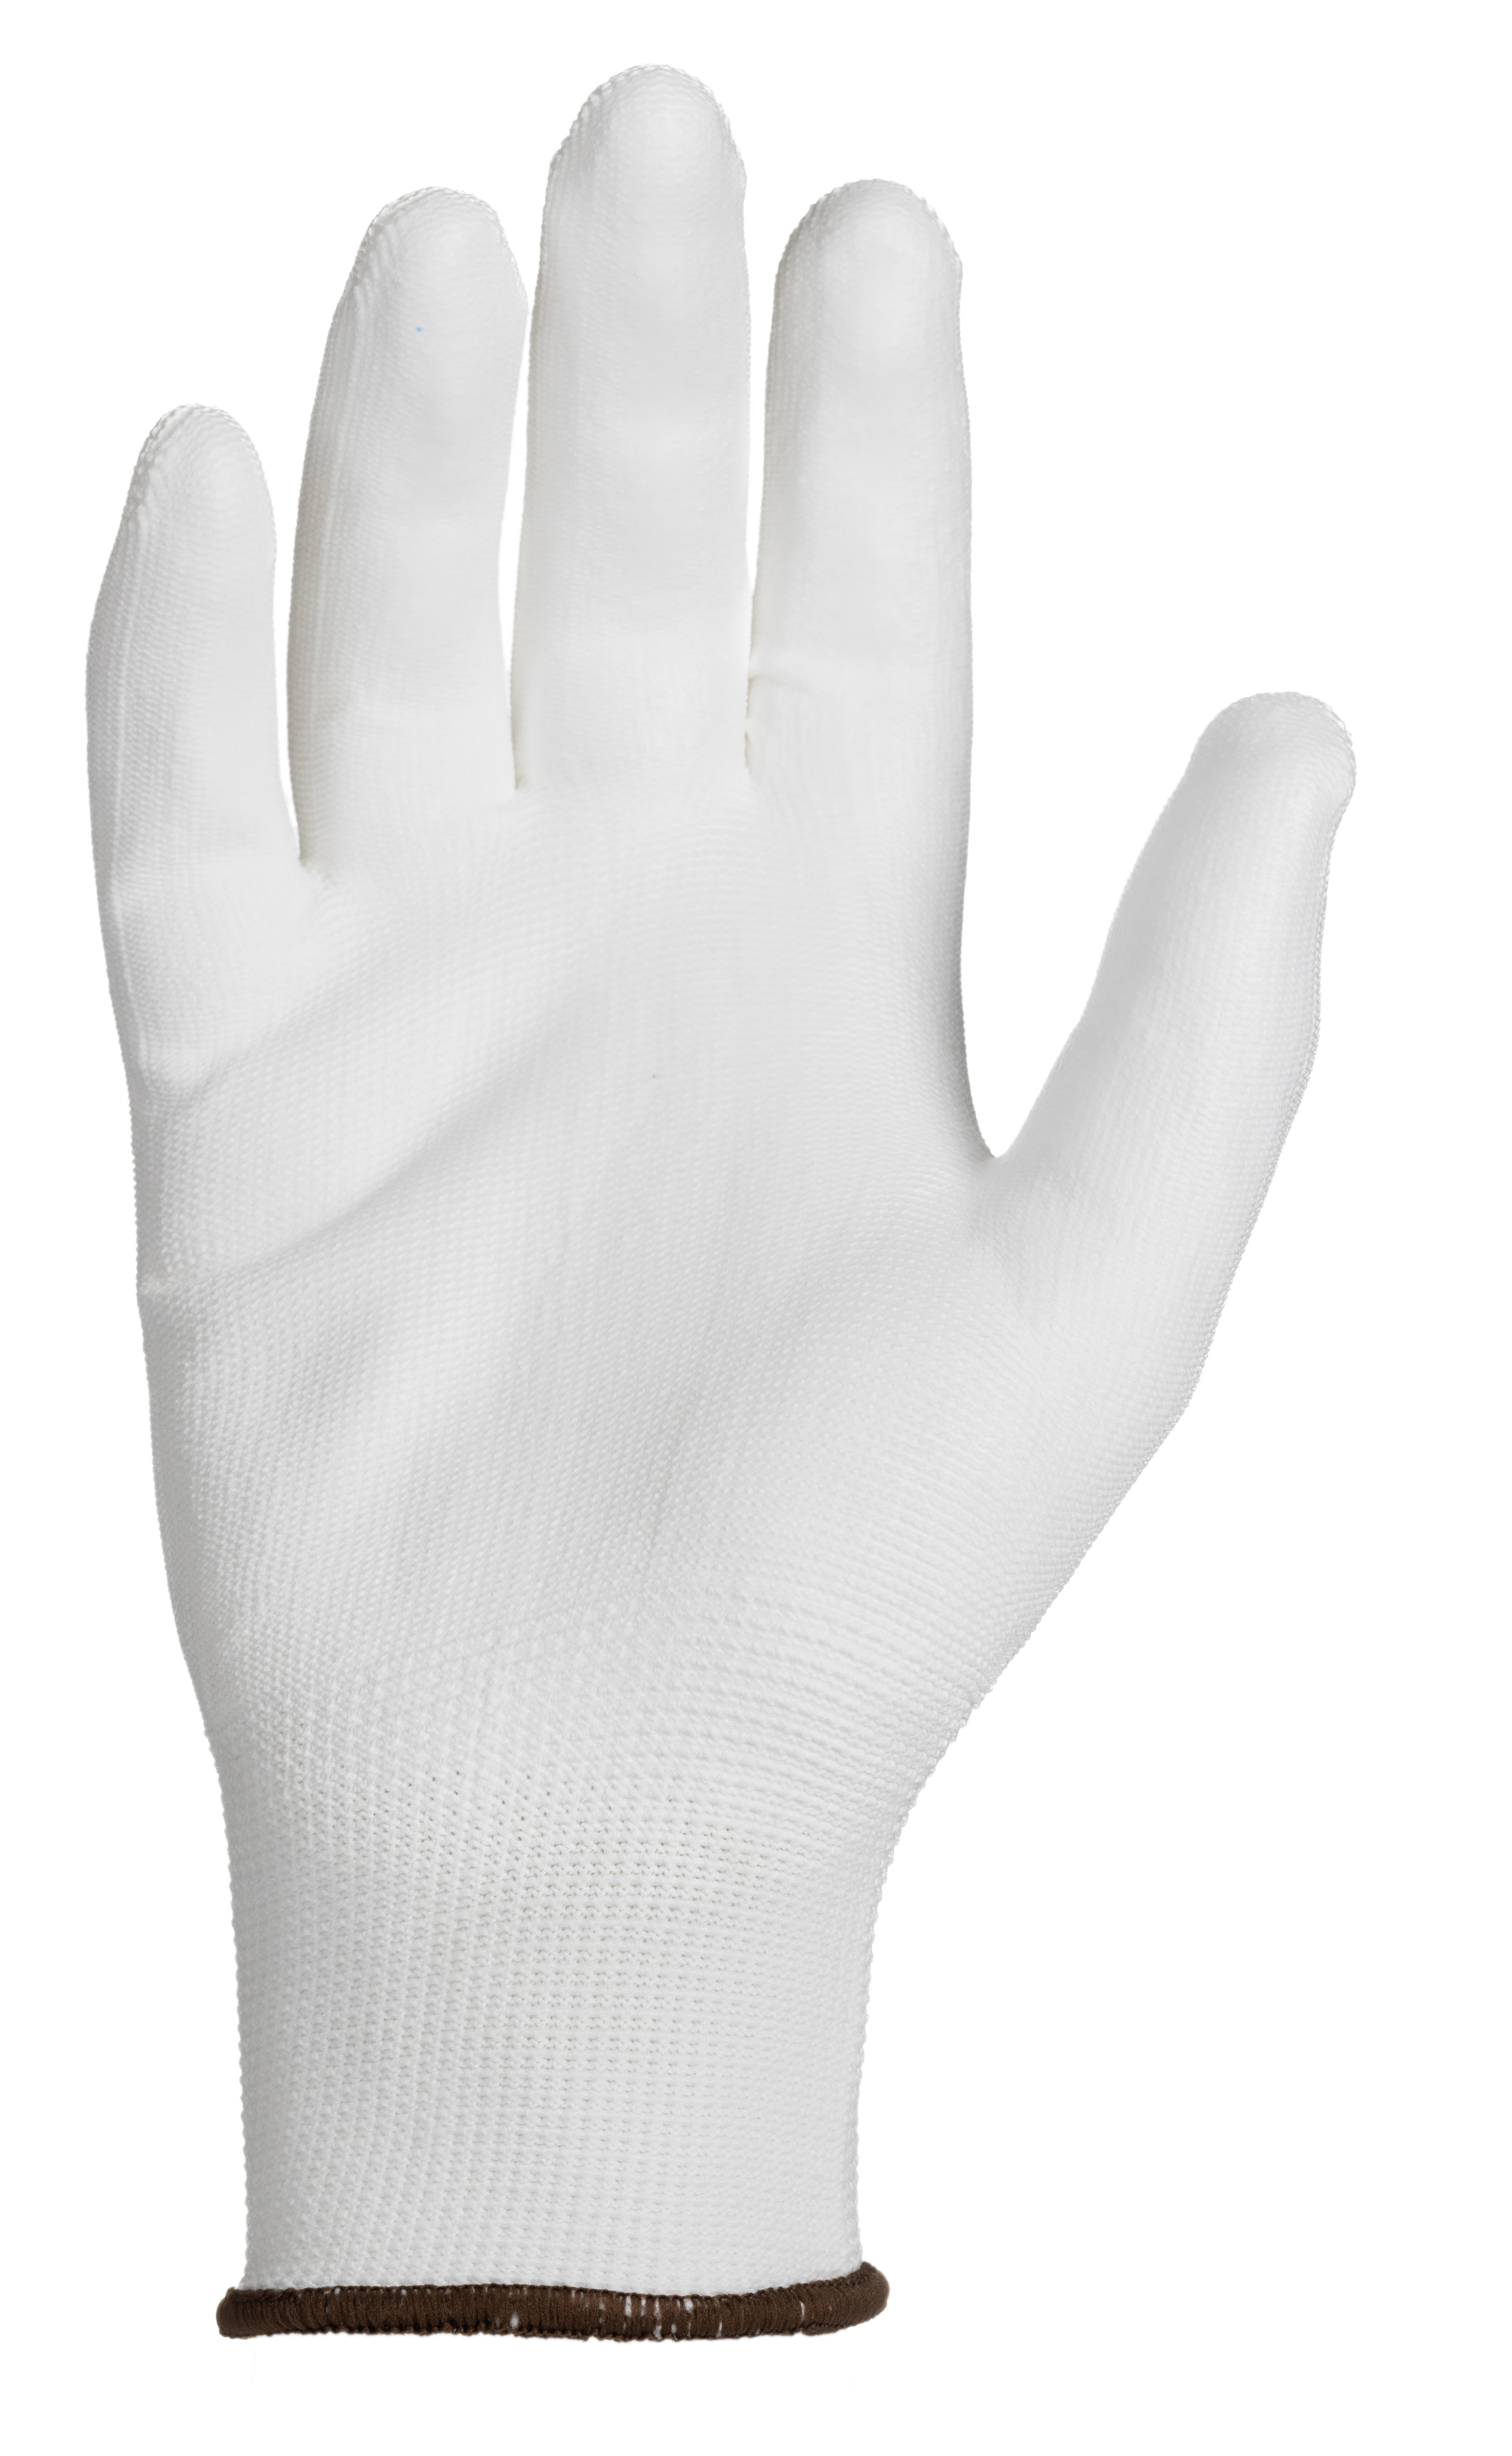 The Different Types of Work Gloves and When to Use Them